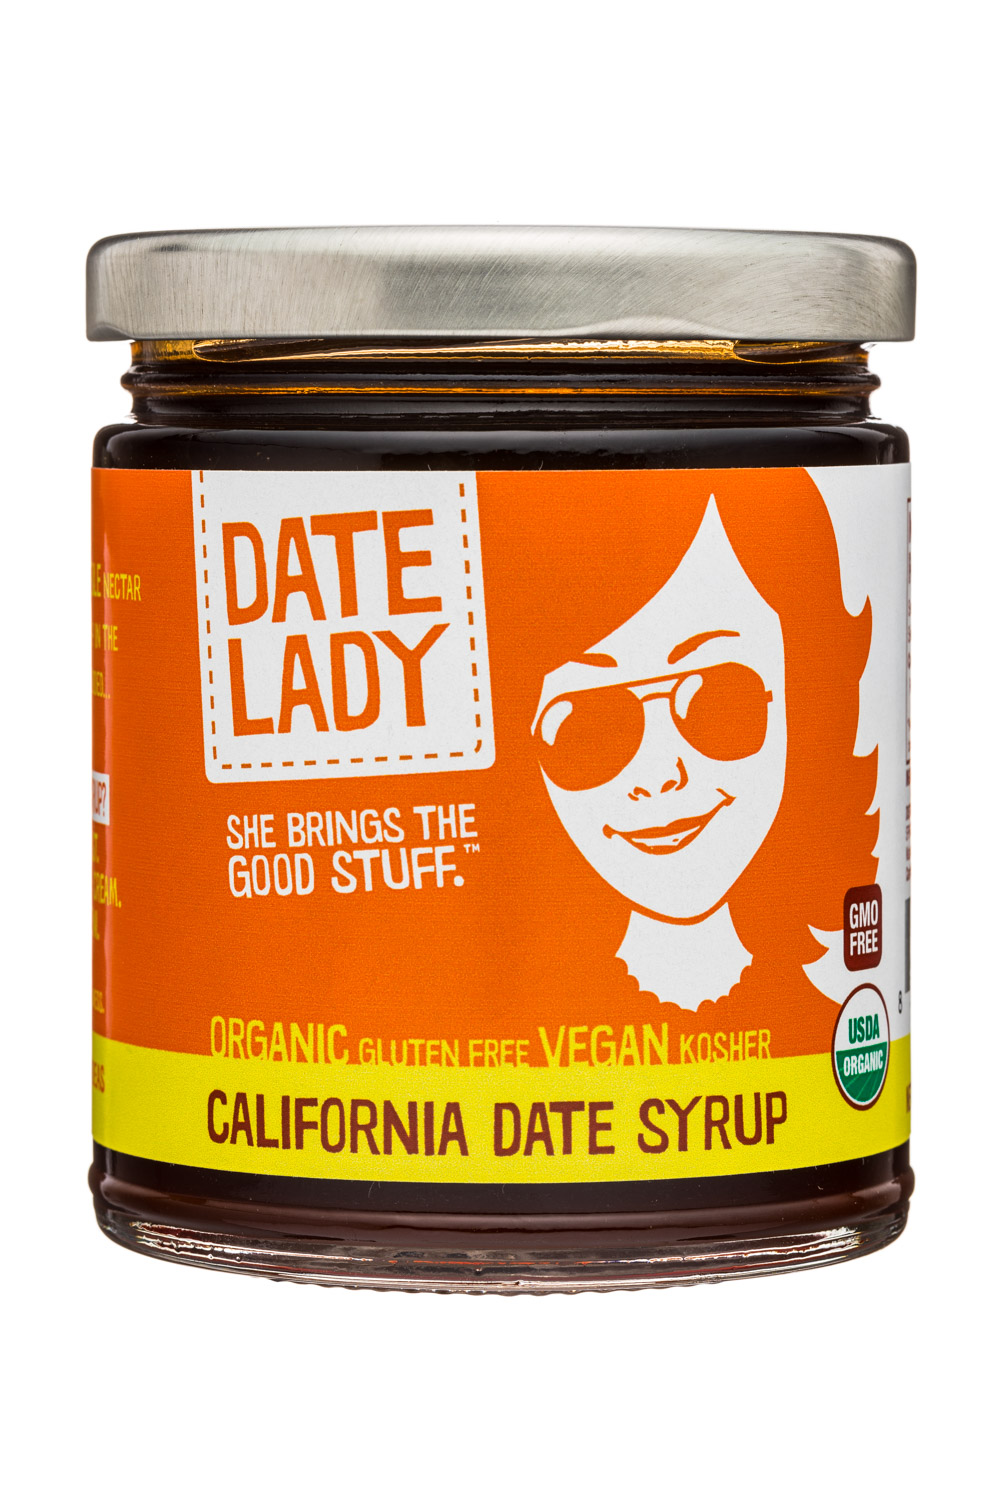 California Date Syrup